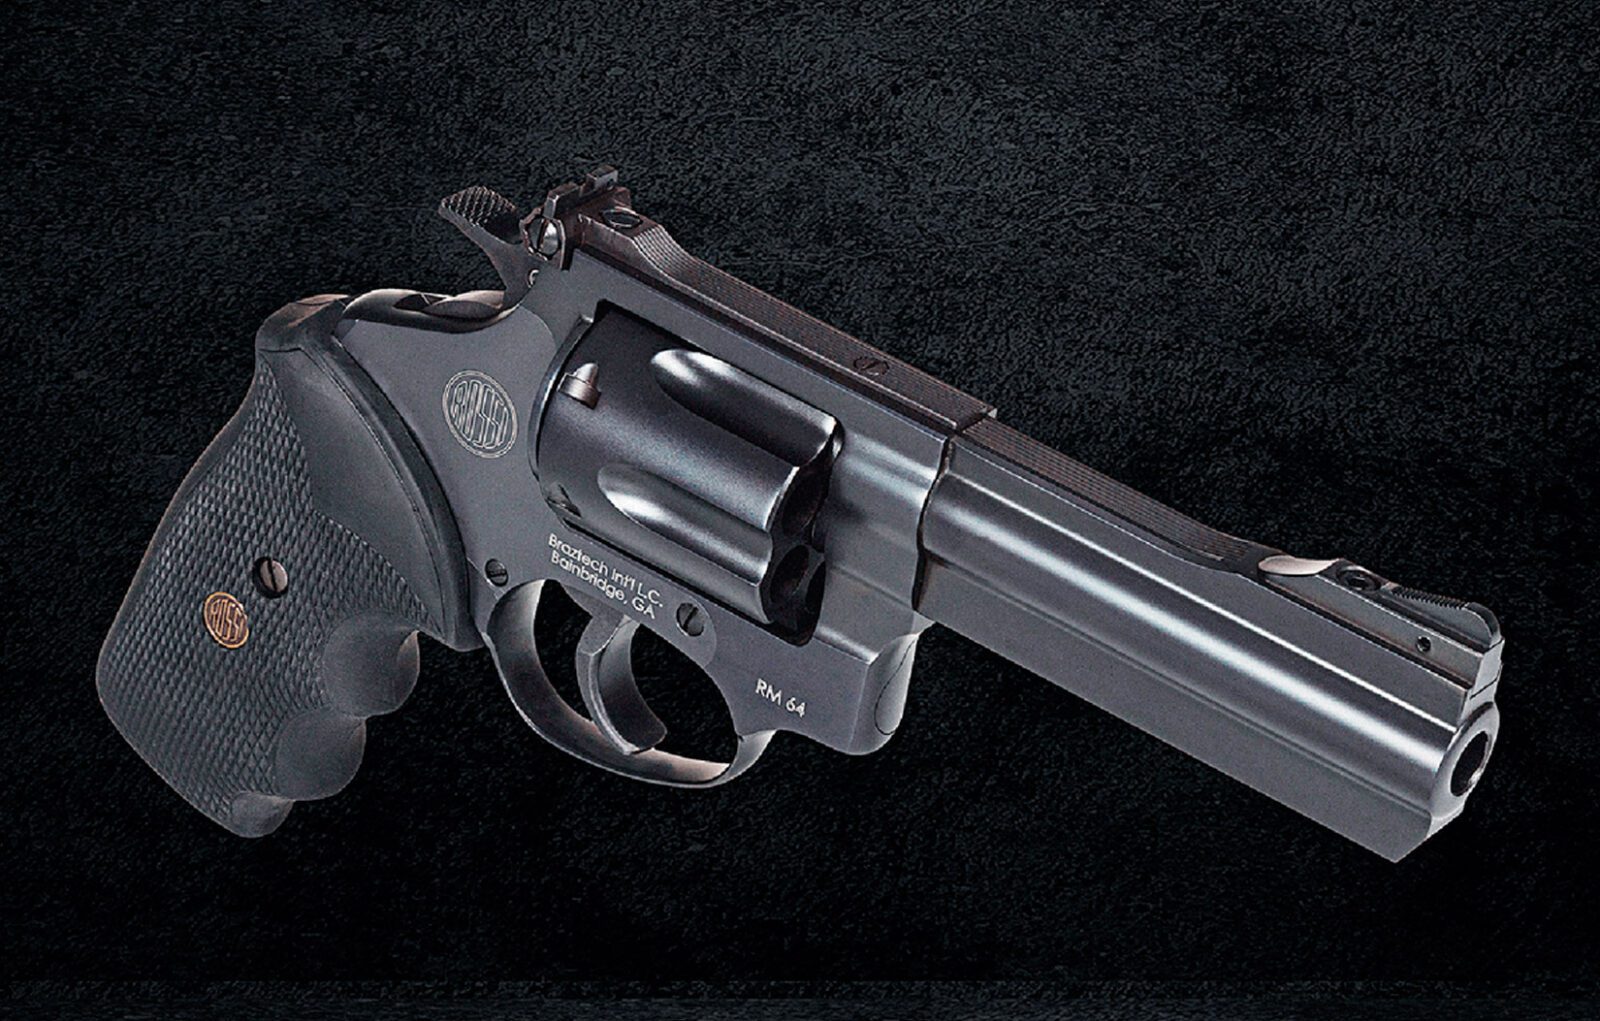 Taurus launches RM64 revolver, a new model from the century-old Rossi brand